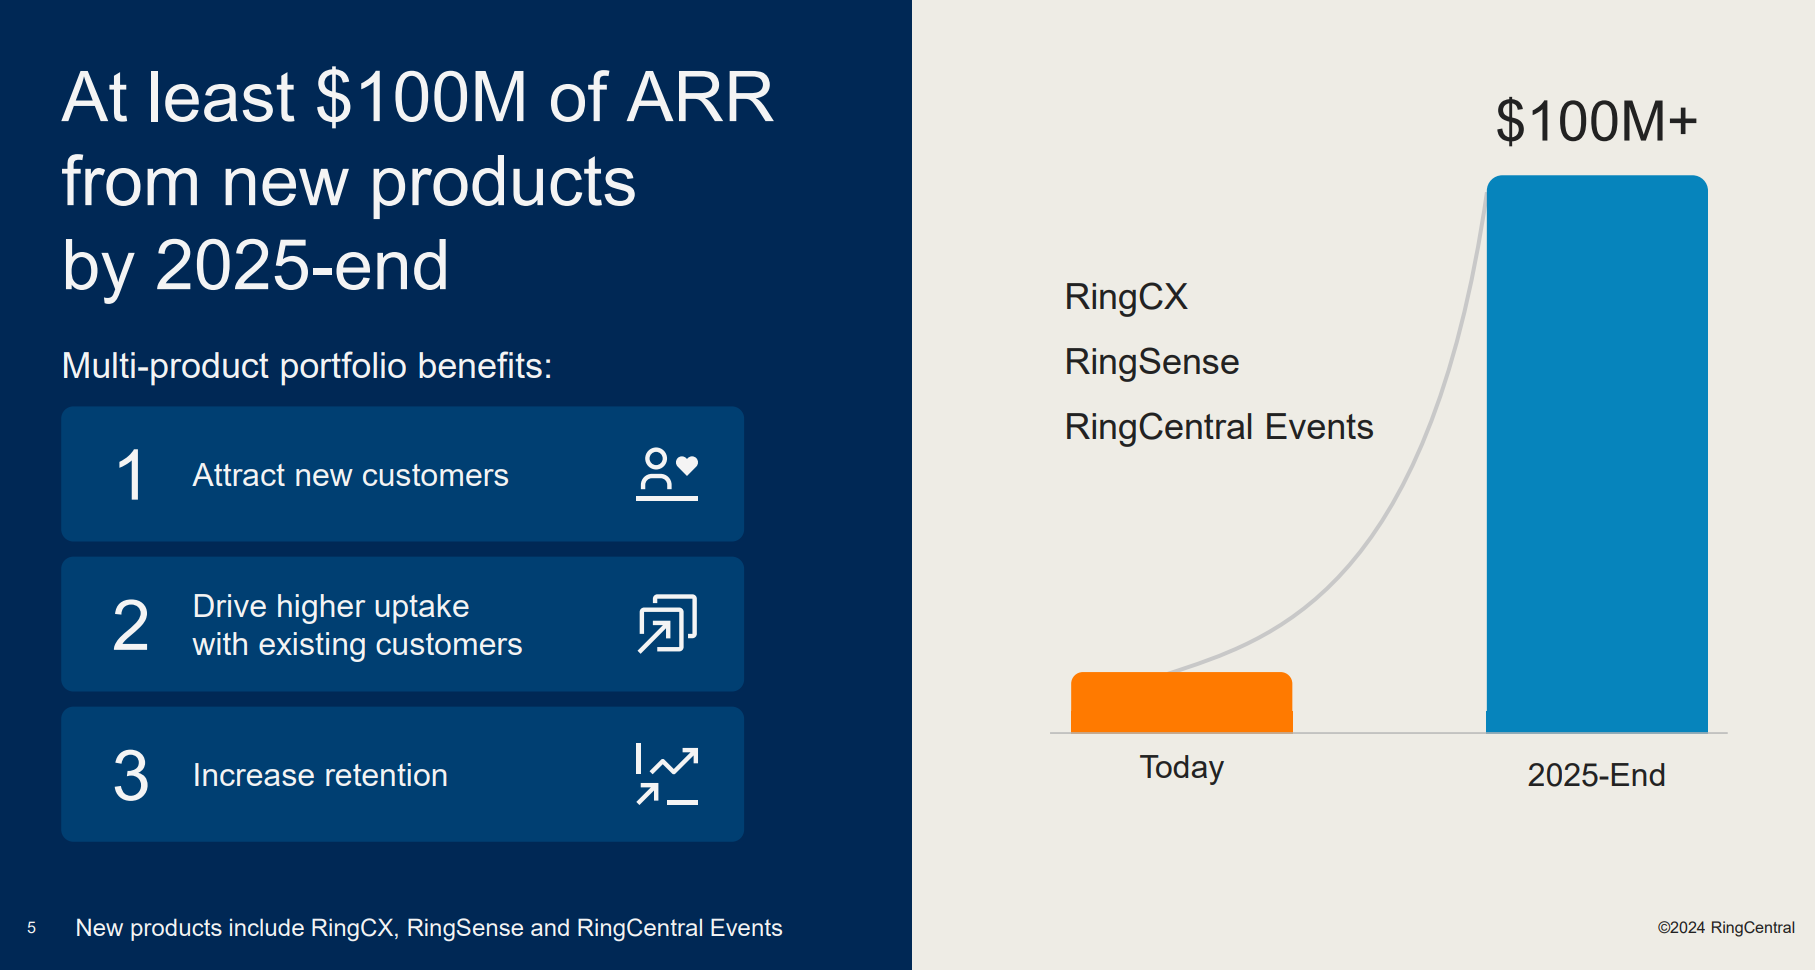 RC's strategy for $100M in ARR